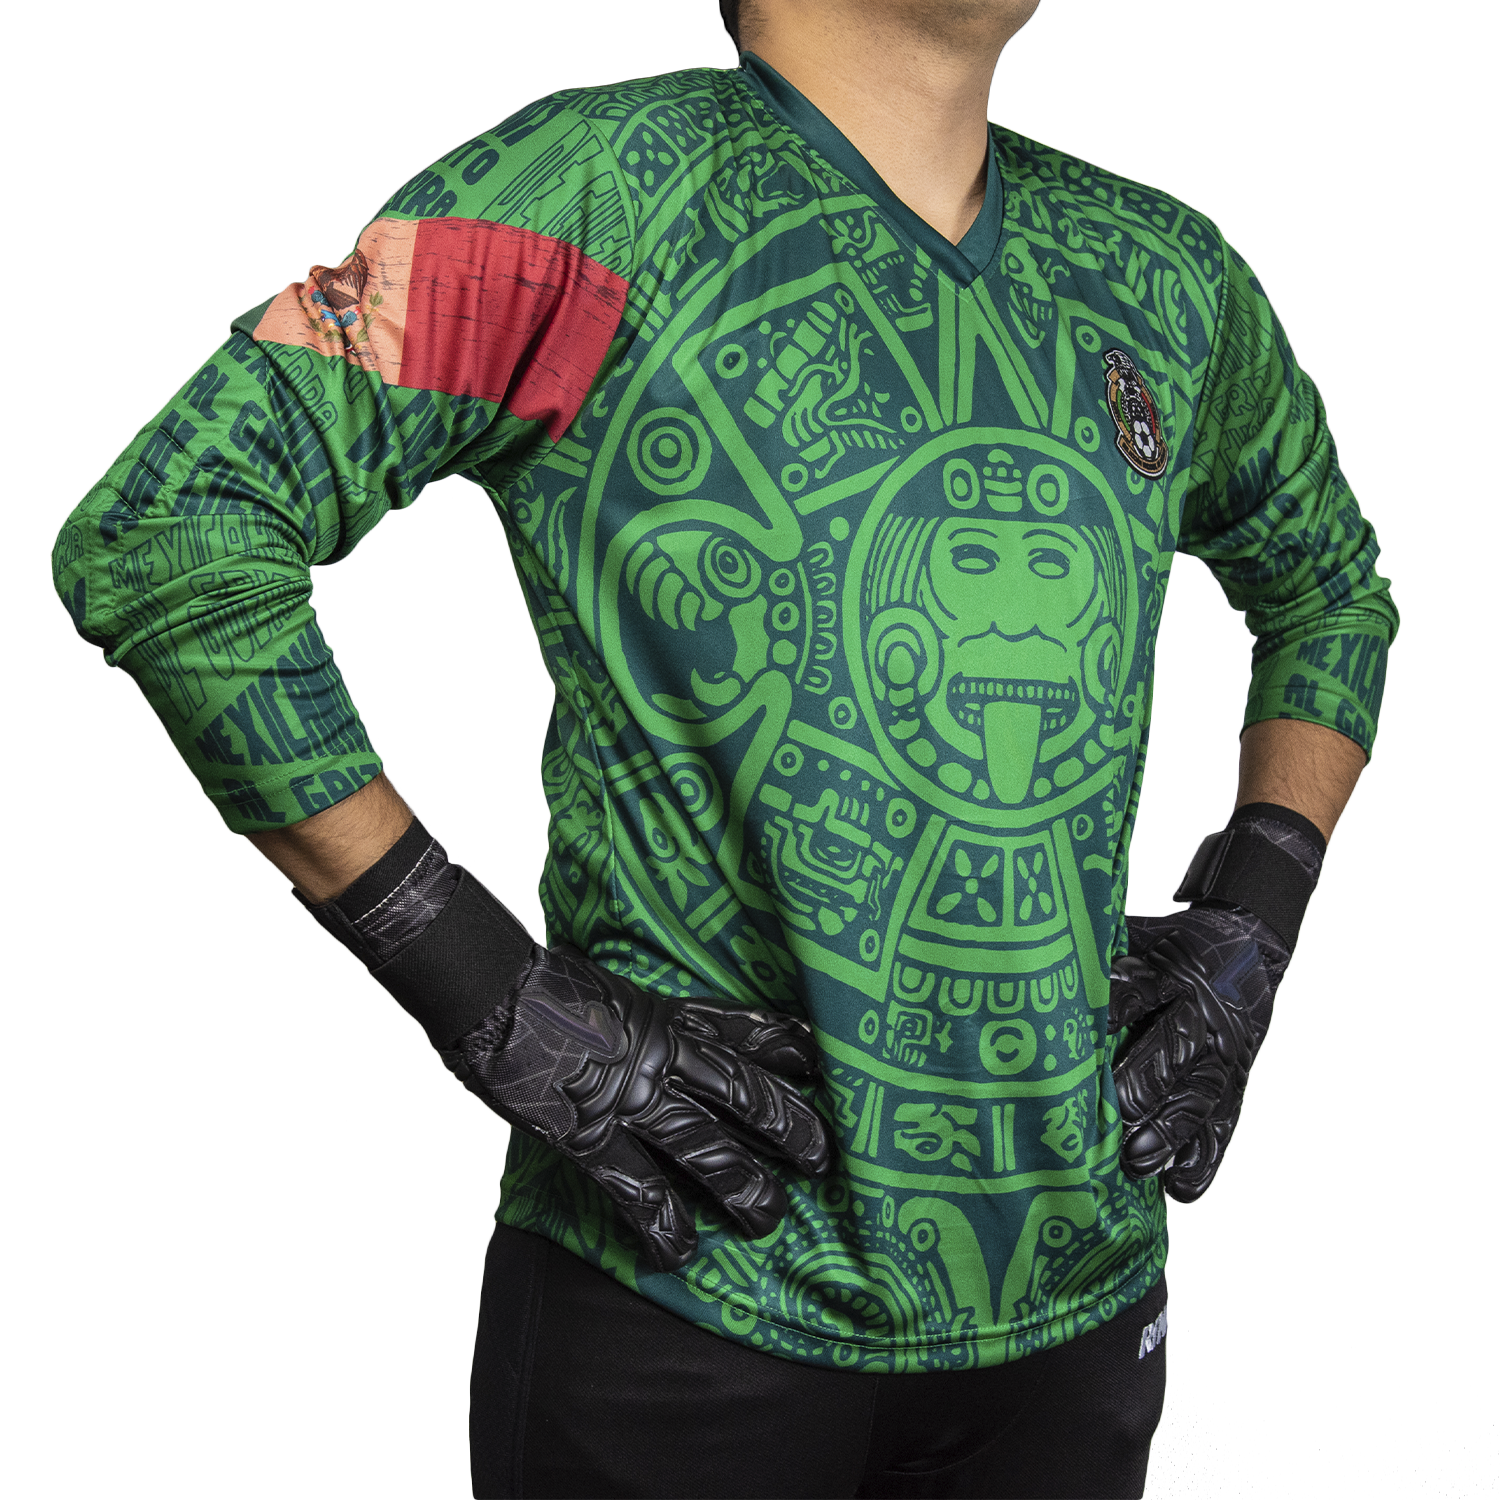 Mexico 98 Green Retro Goalkeeper Jersey by Geko Sports Limited Edition 5